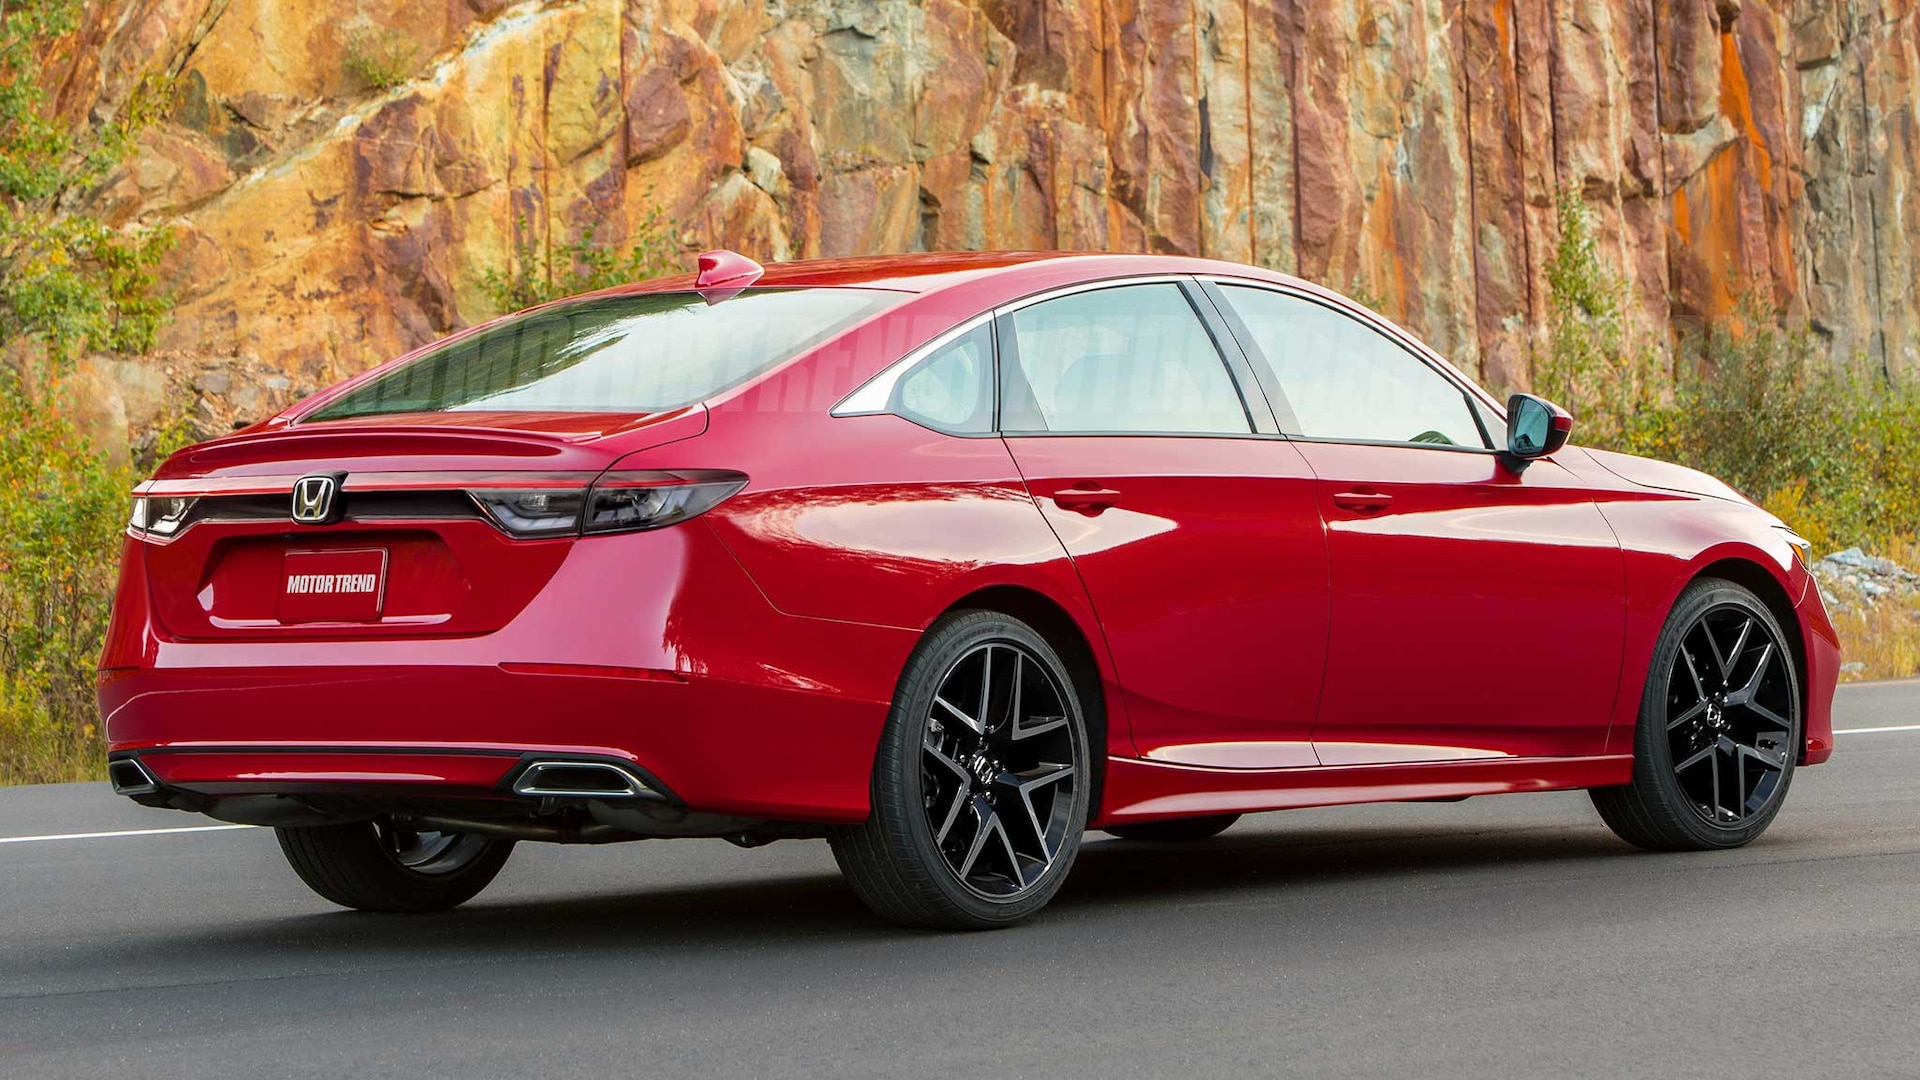 2023 Honda Accord: Everything We Know About The Next Generation Midsize Sedan